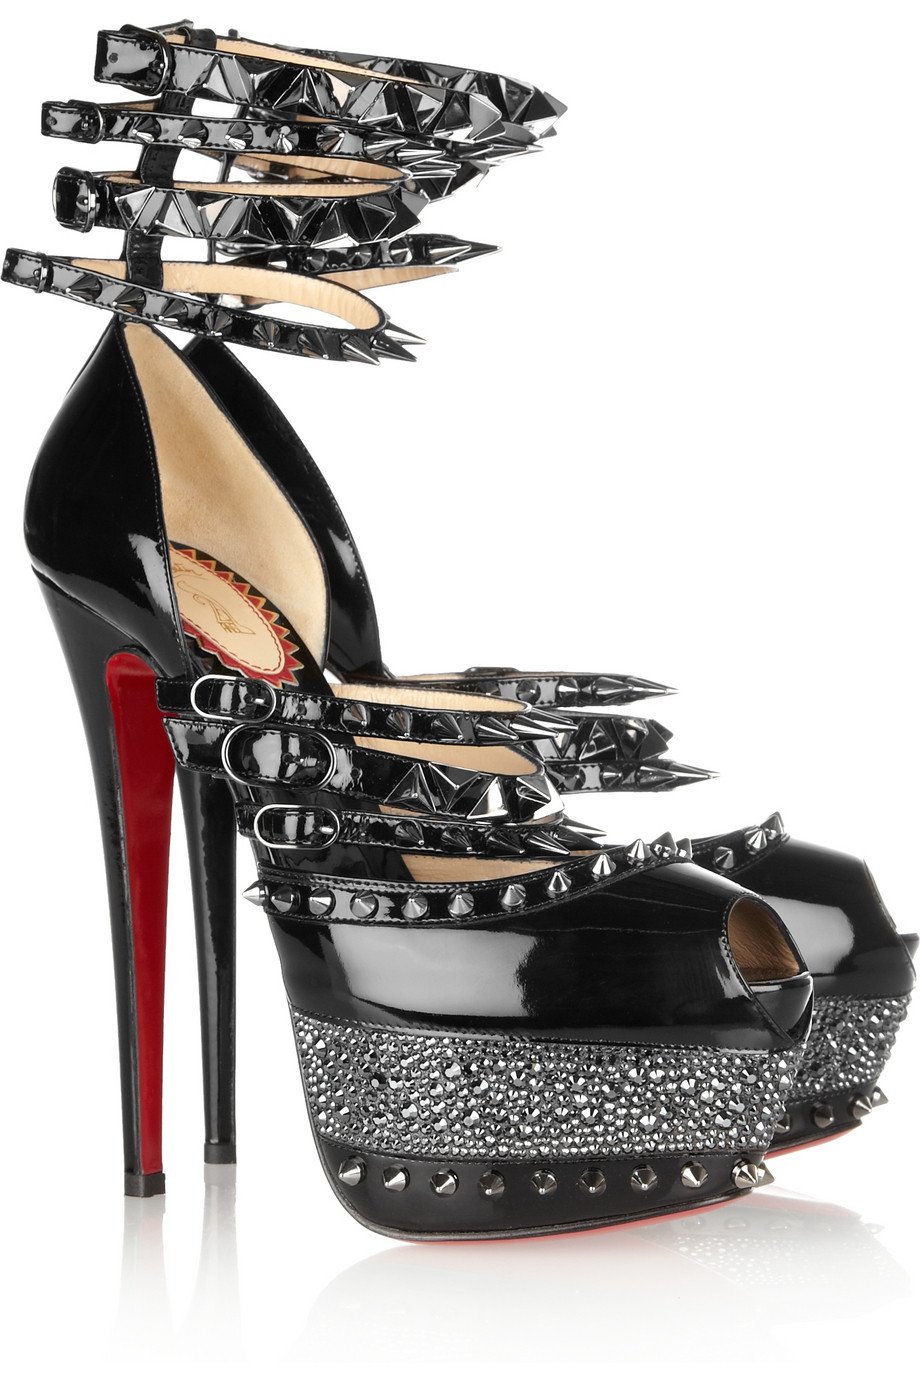 Christian Louboutin's 20th anniversary Isolde Spiked Patent-leather Sandals